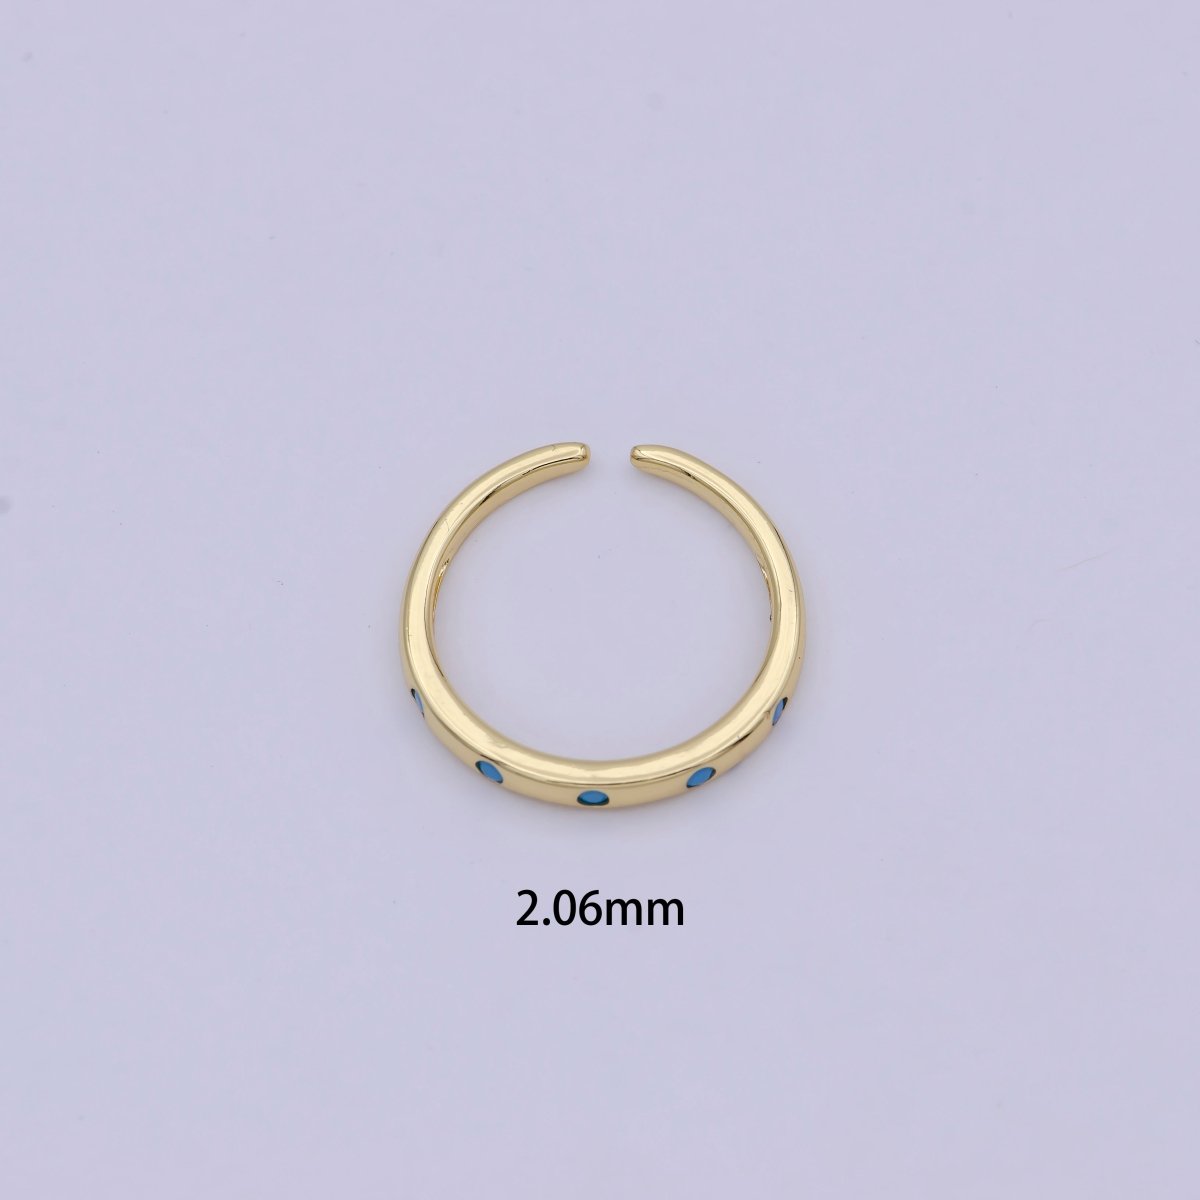 Dainty Gold Stacking Ring, Gold Minimalist CZ Ring, Simple Open Adjustable Thin Ring, Gift for Her, Delicate Ring U-485 ~ U-489 - DLUXCA